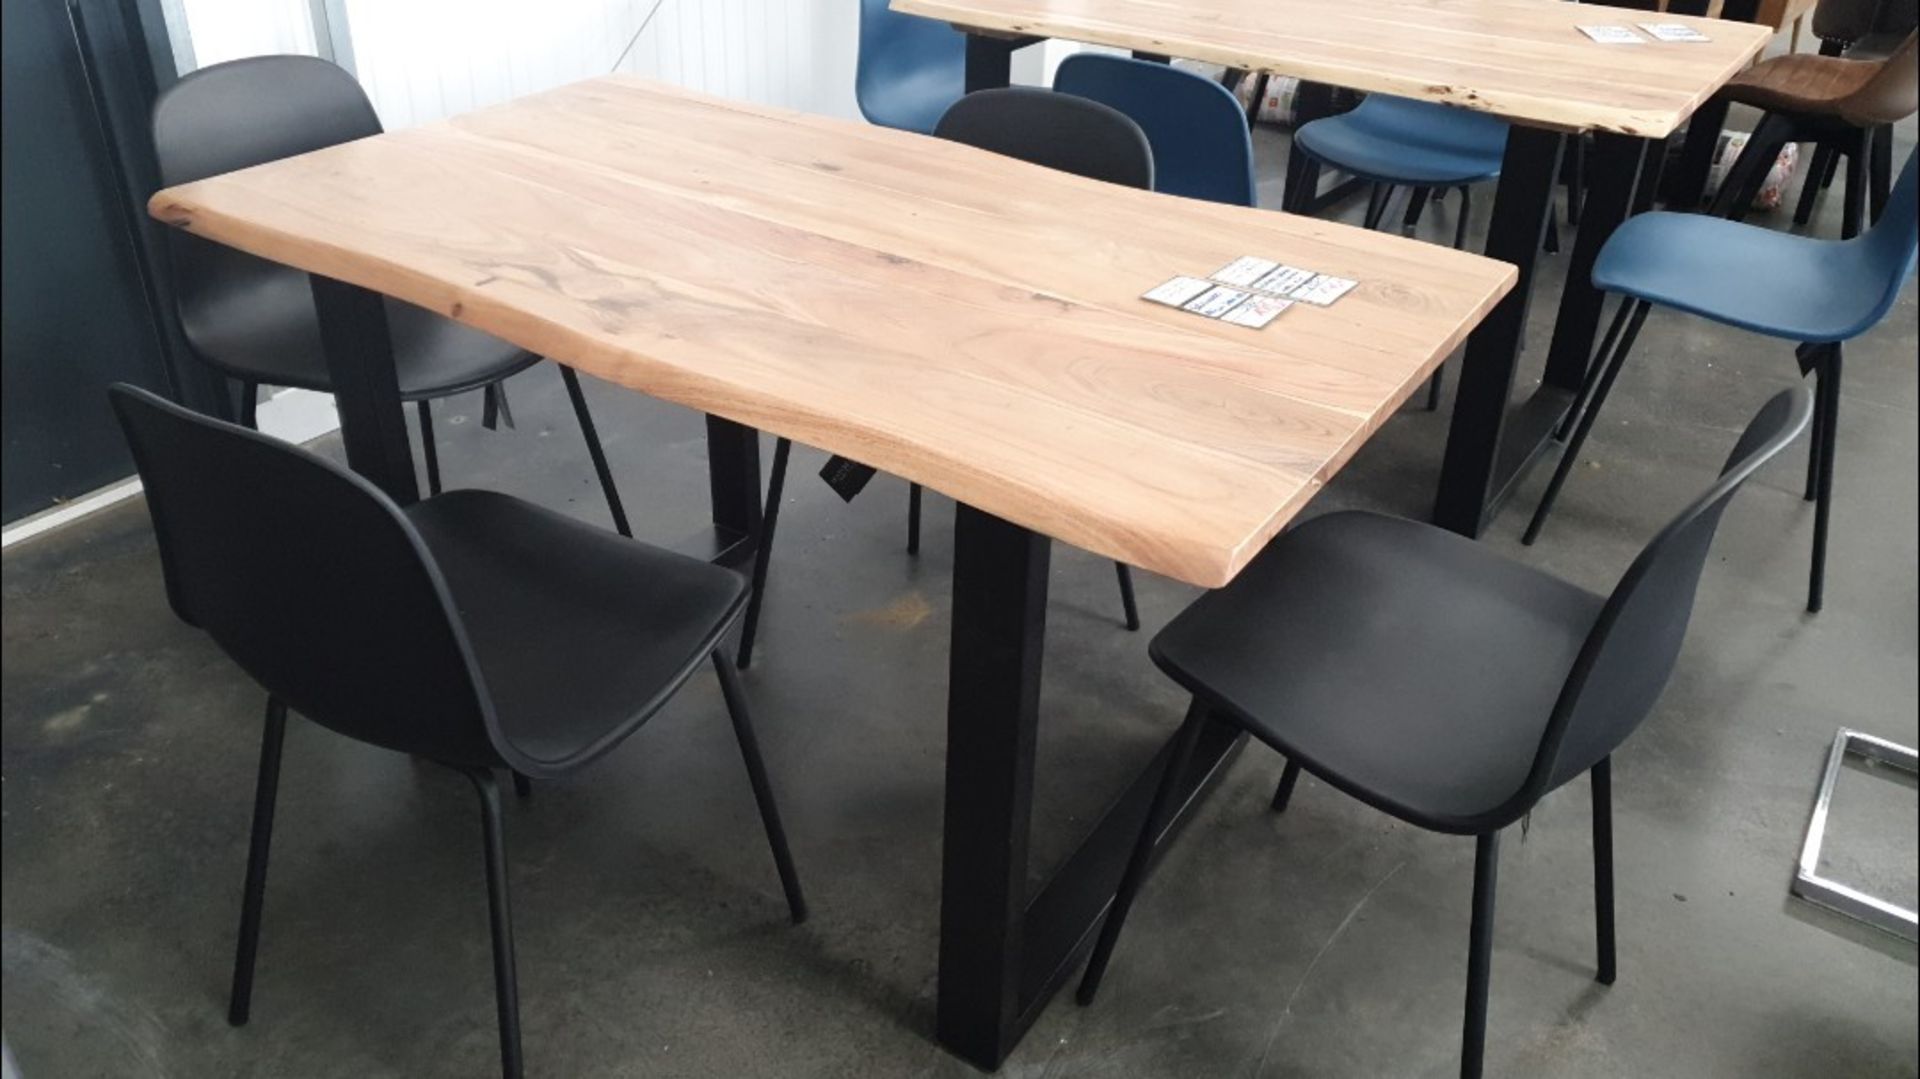 SOLID WOOD 140CM DINING TABLE WITH 4 DINING CHAIRS RRP £680 *PLUS VAT*